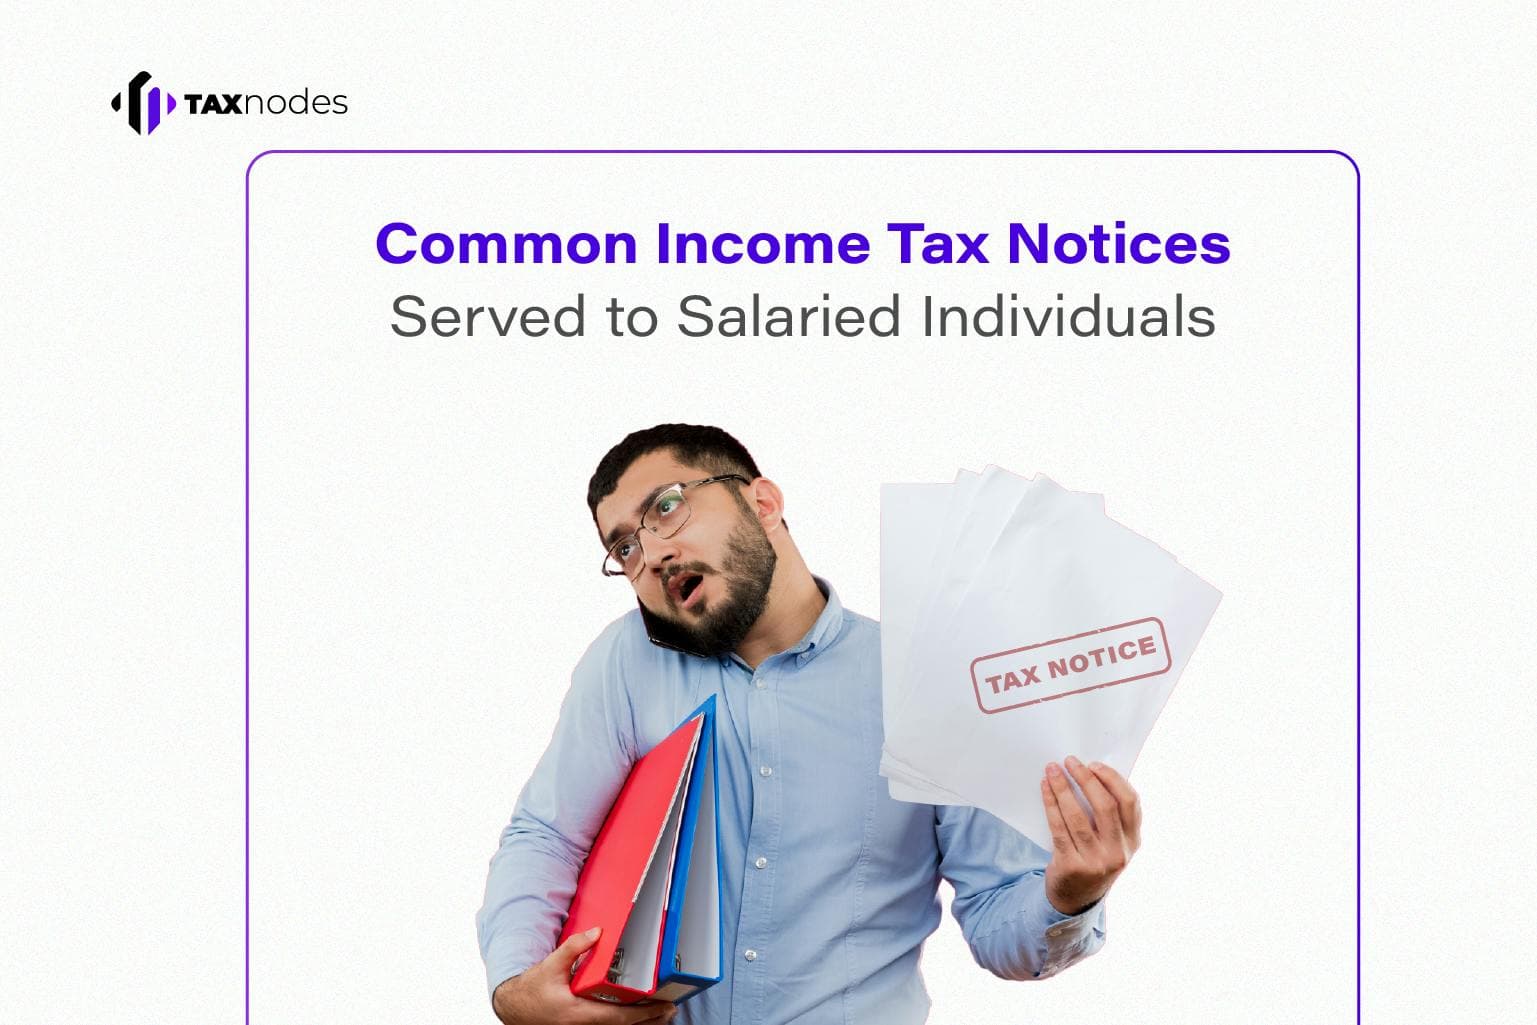 Tax Notices for Salaried Individuals